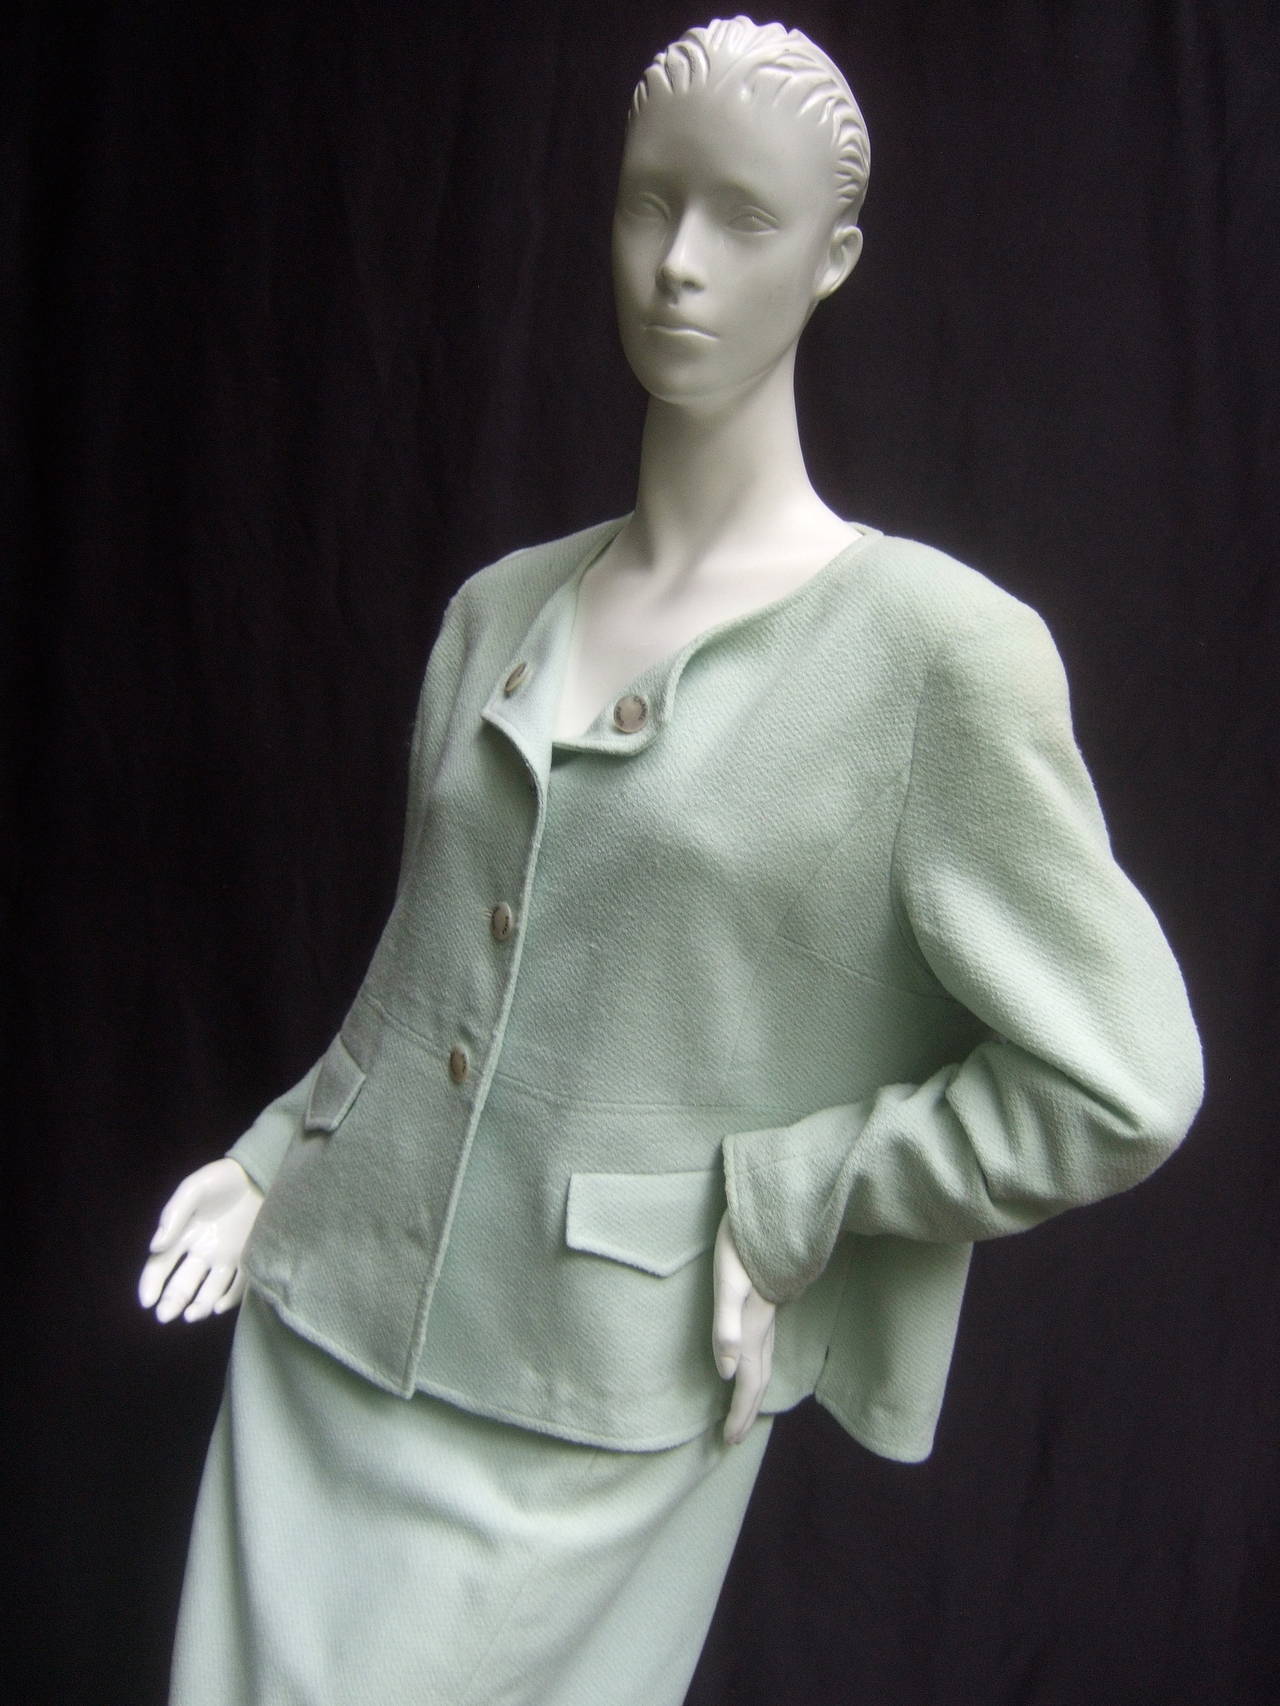 Gray Chanel Boutique Chic Mint Green Wool Skirt Suit  c 1990